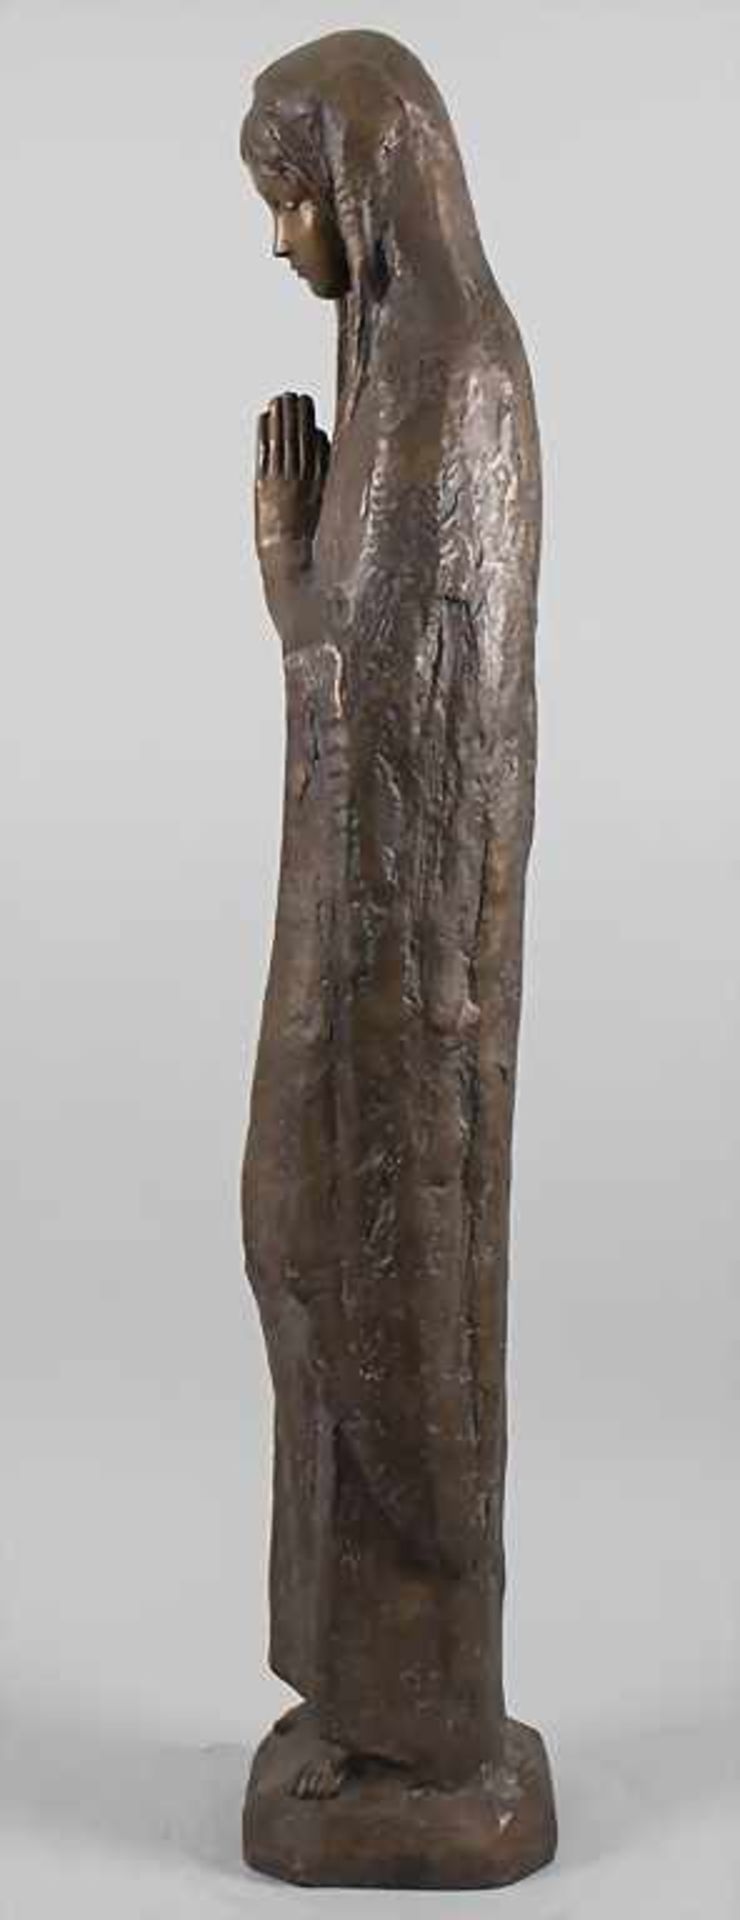 Bronze Skulptur 'Betende Maria' / A bronze sculpture of 'The praying Mary', 20. Jh. - Image 4 of 5